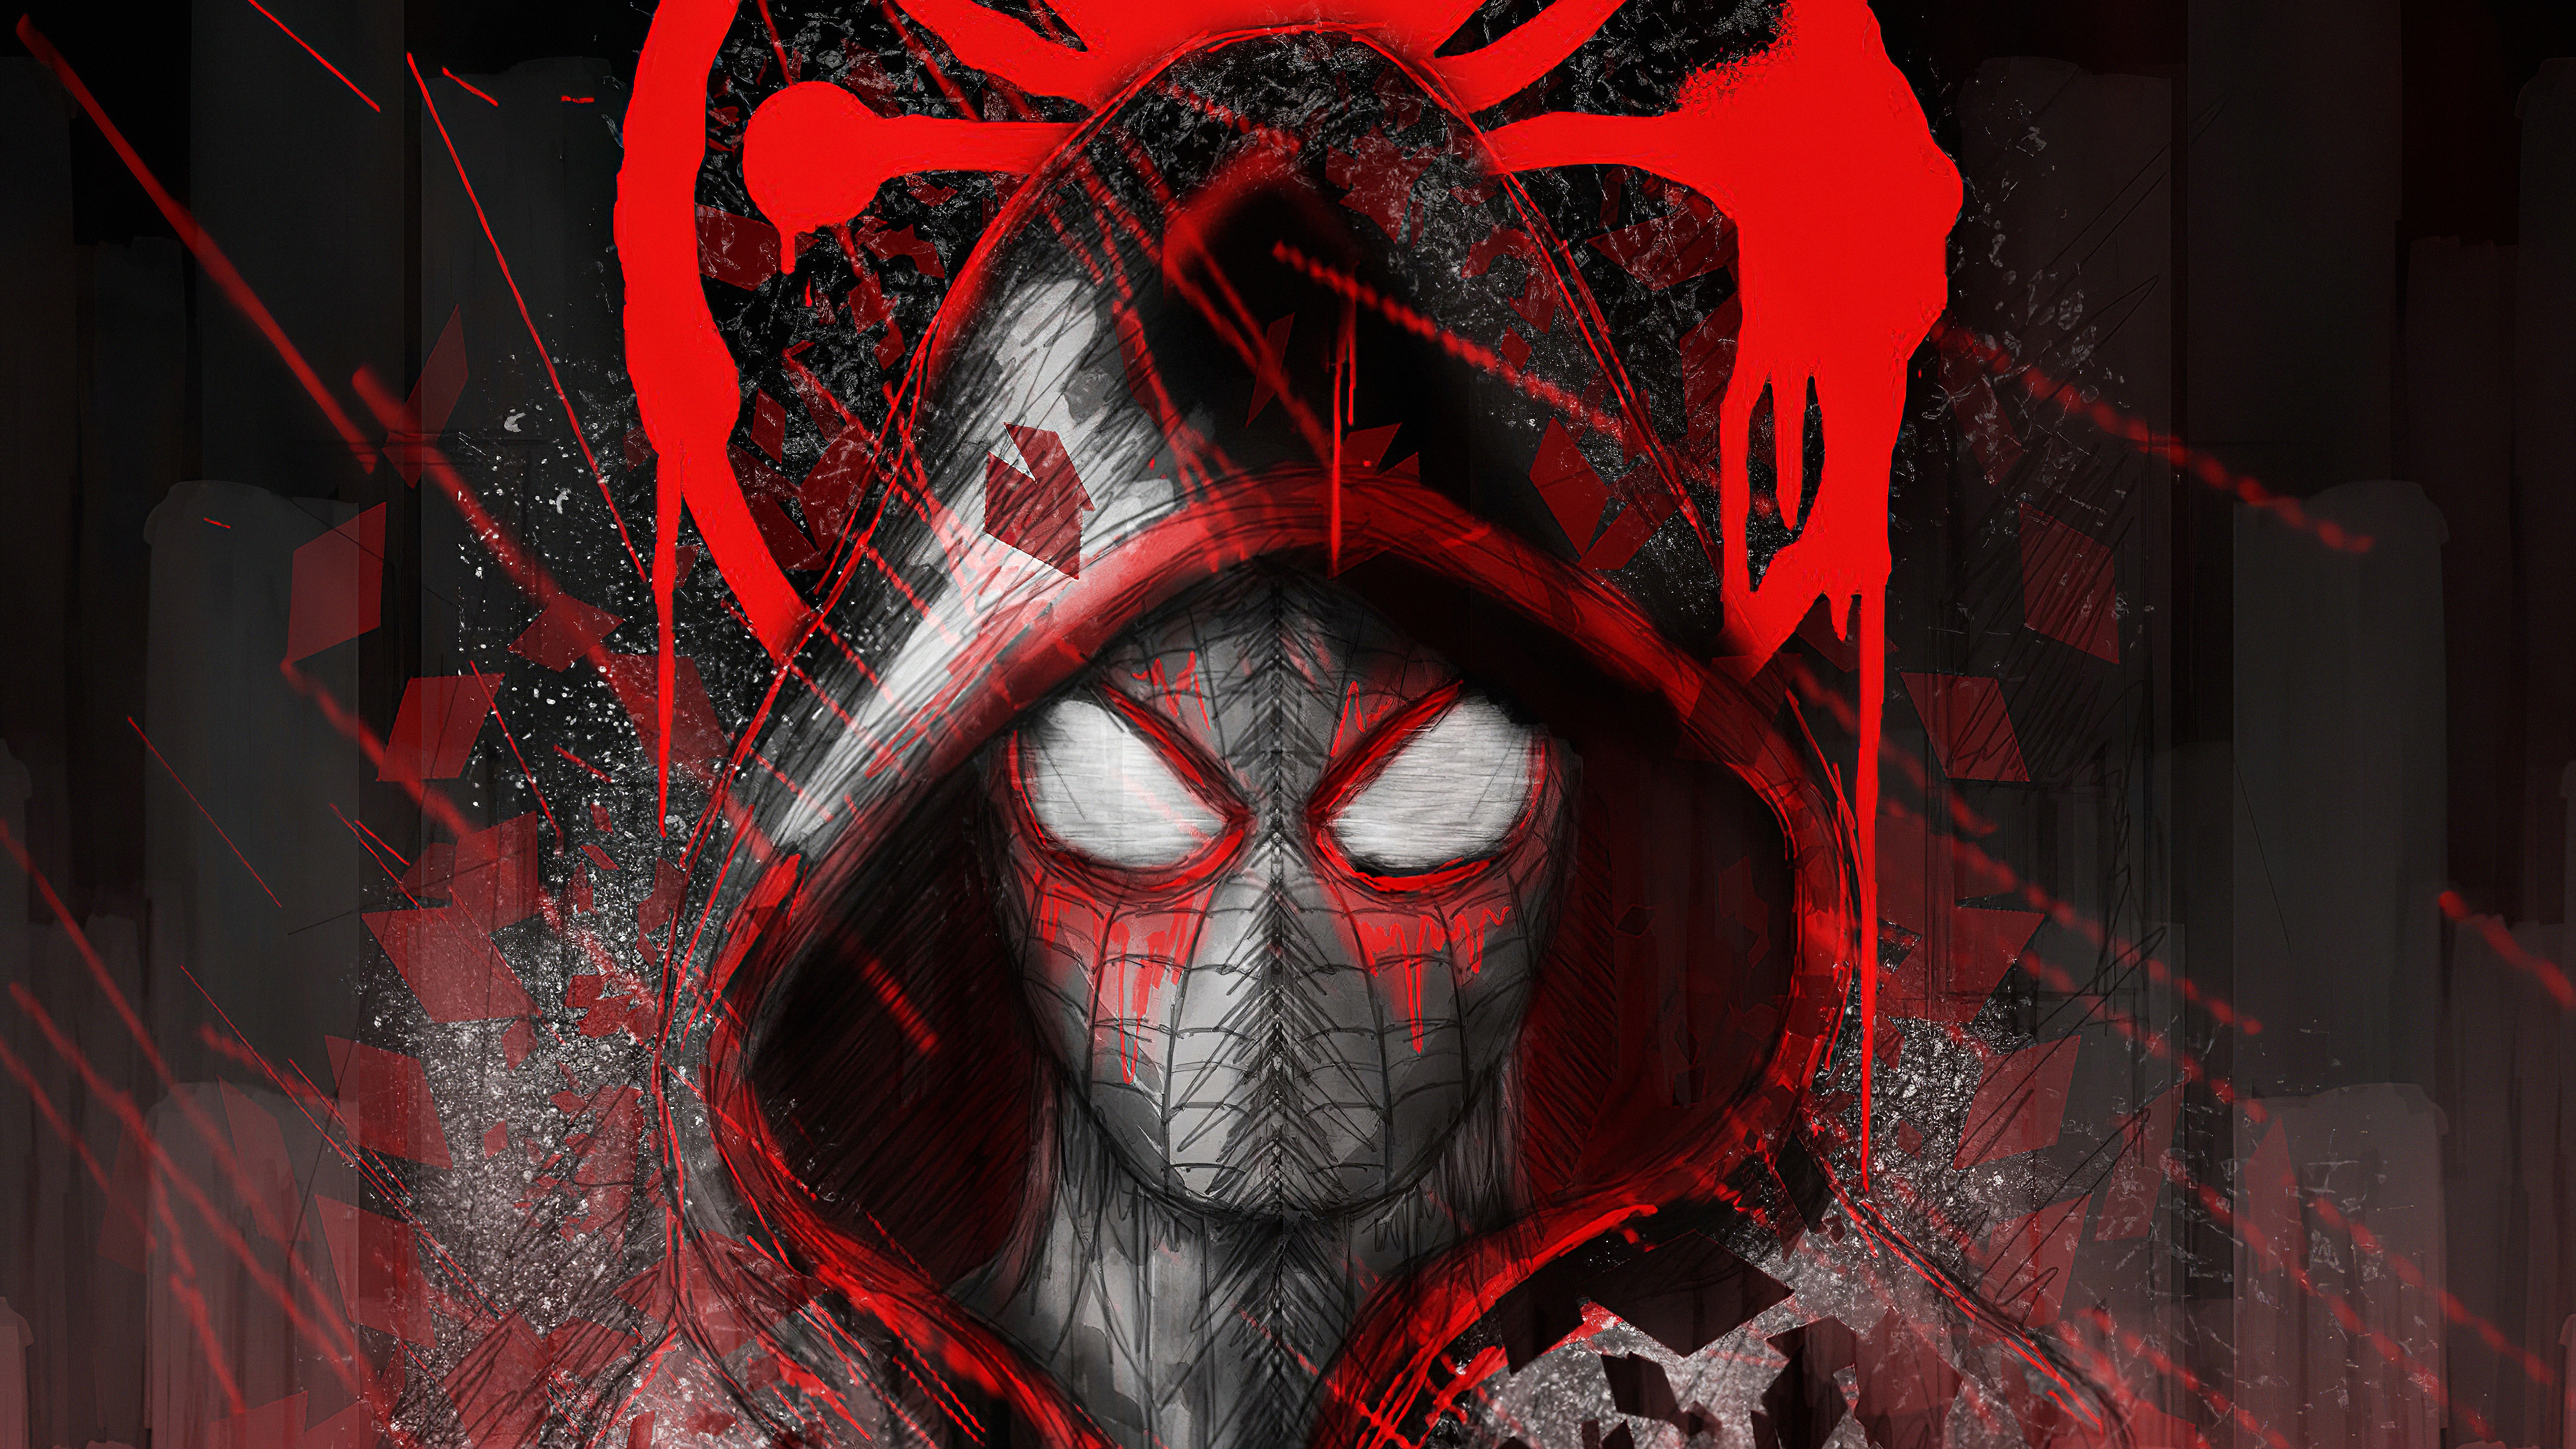 Spider Man Wallpaper 4K For Android : App contains some of the most ...